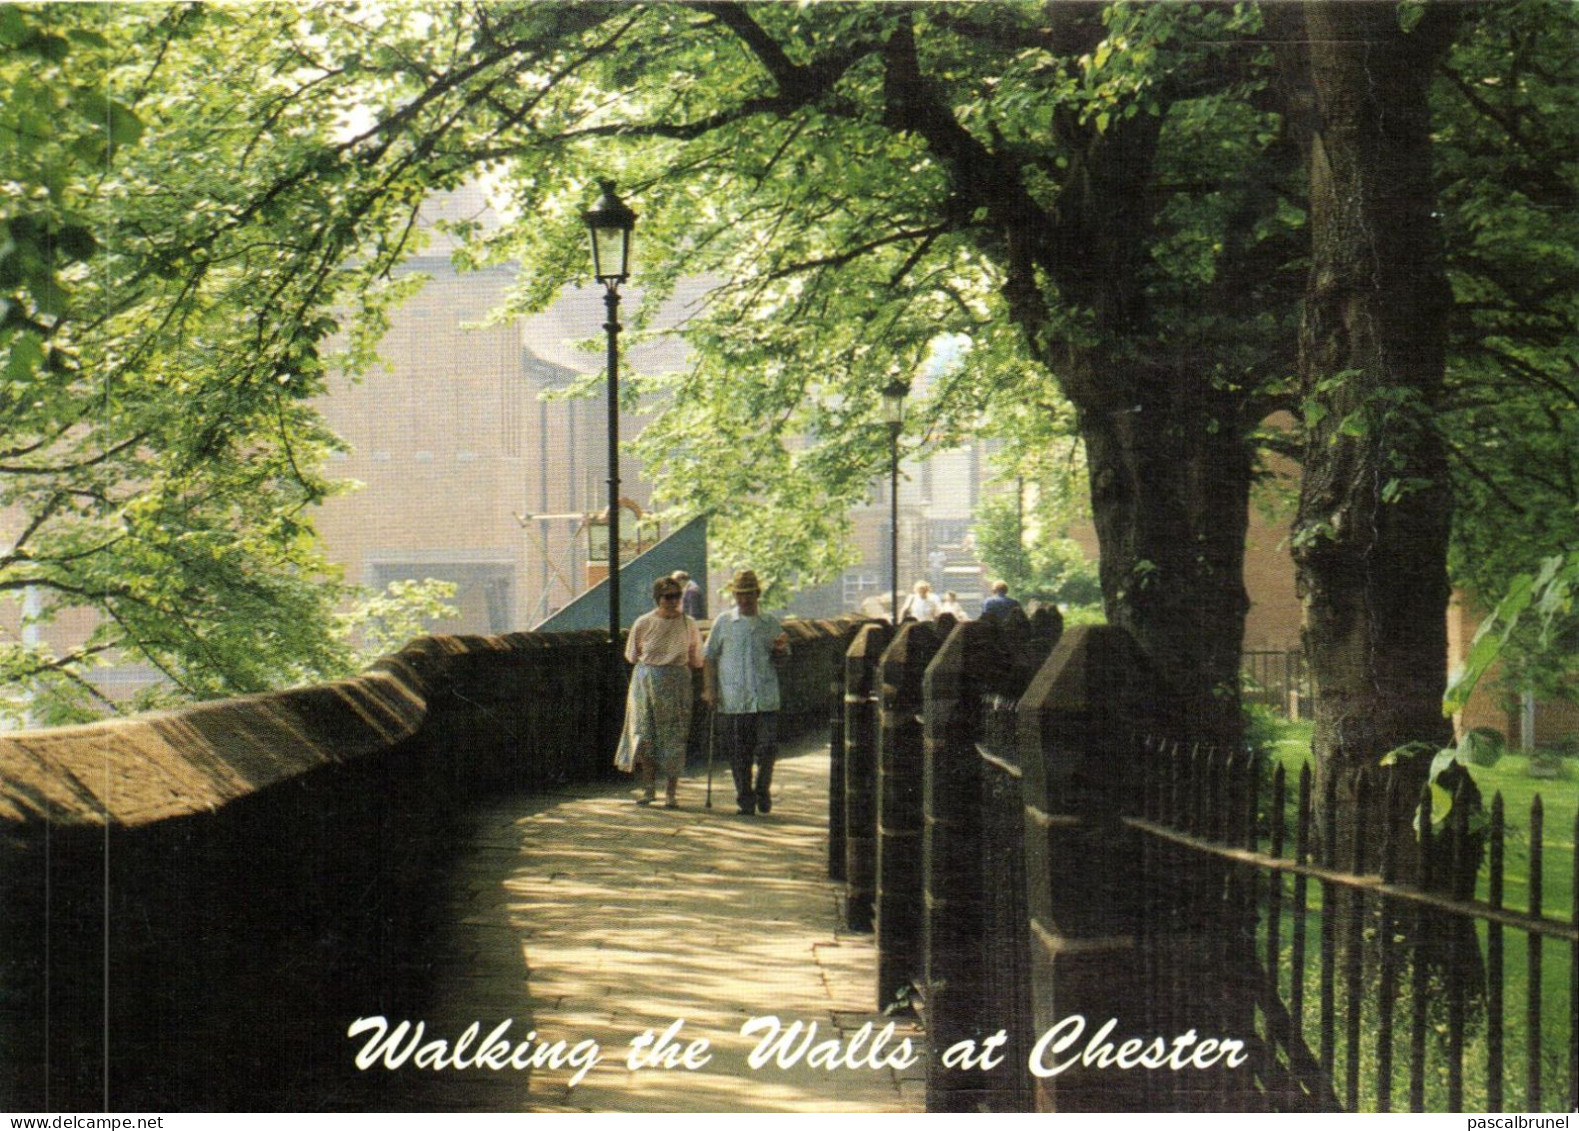 CHESTER - WALKING THE WALLS AT CHESTER - Chester